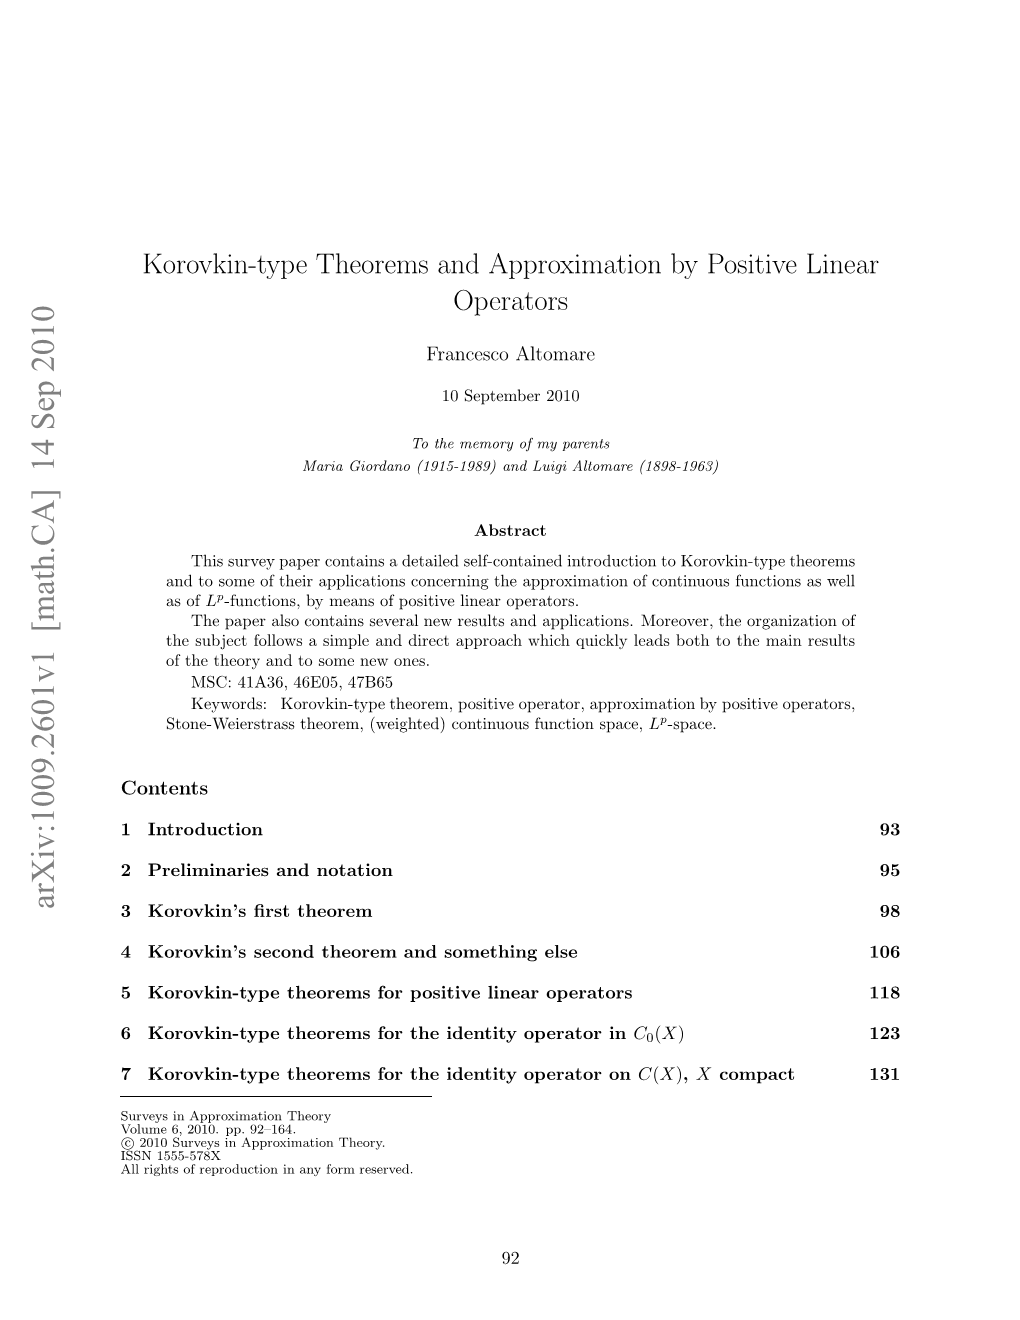 Korovkin-Type Theorems and Approximation by Positive Linear Operators